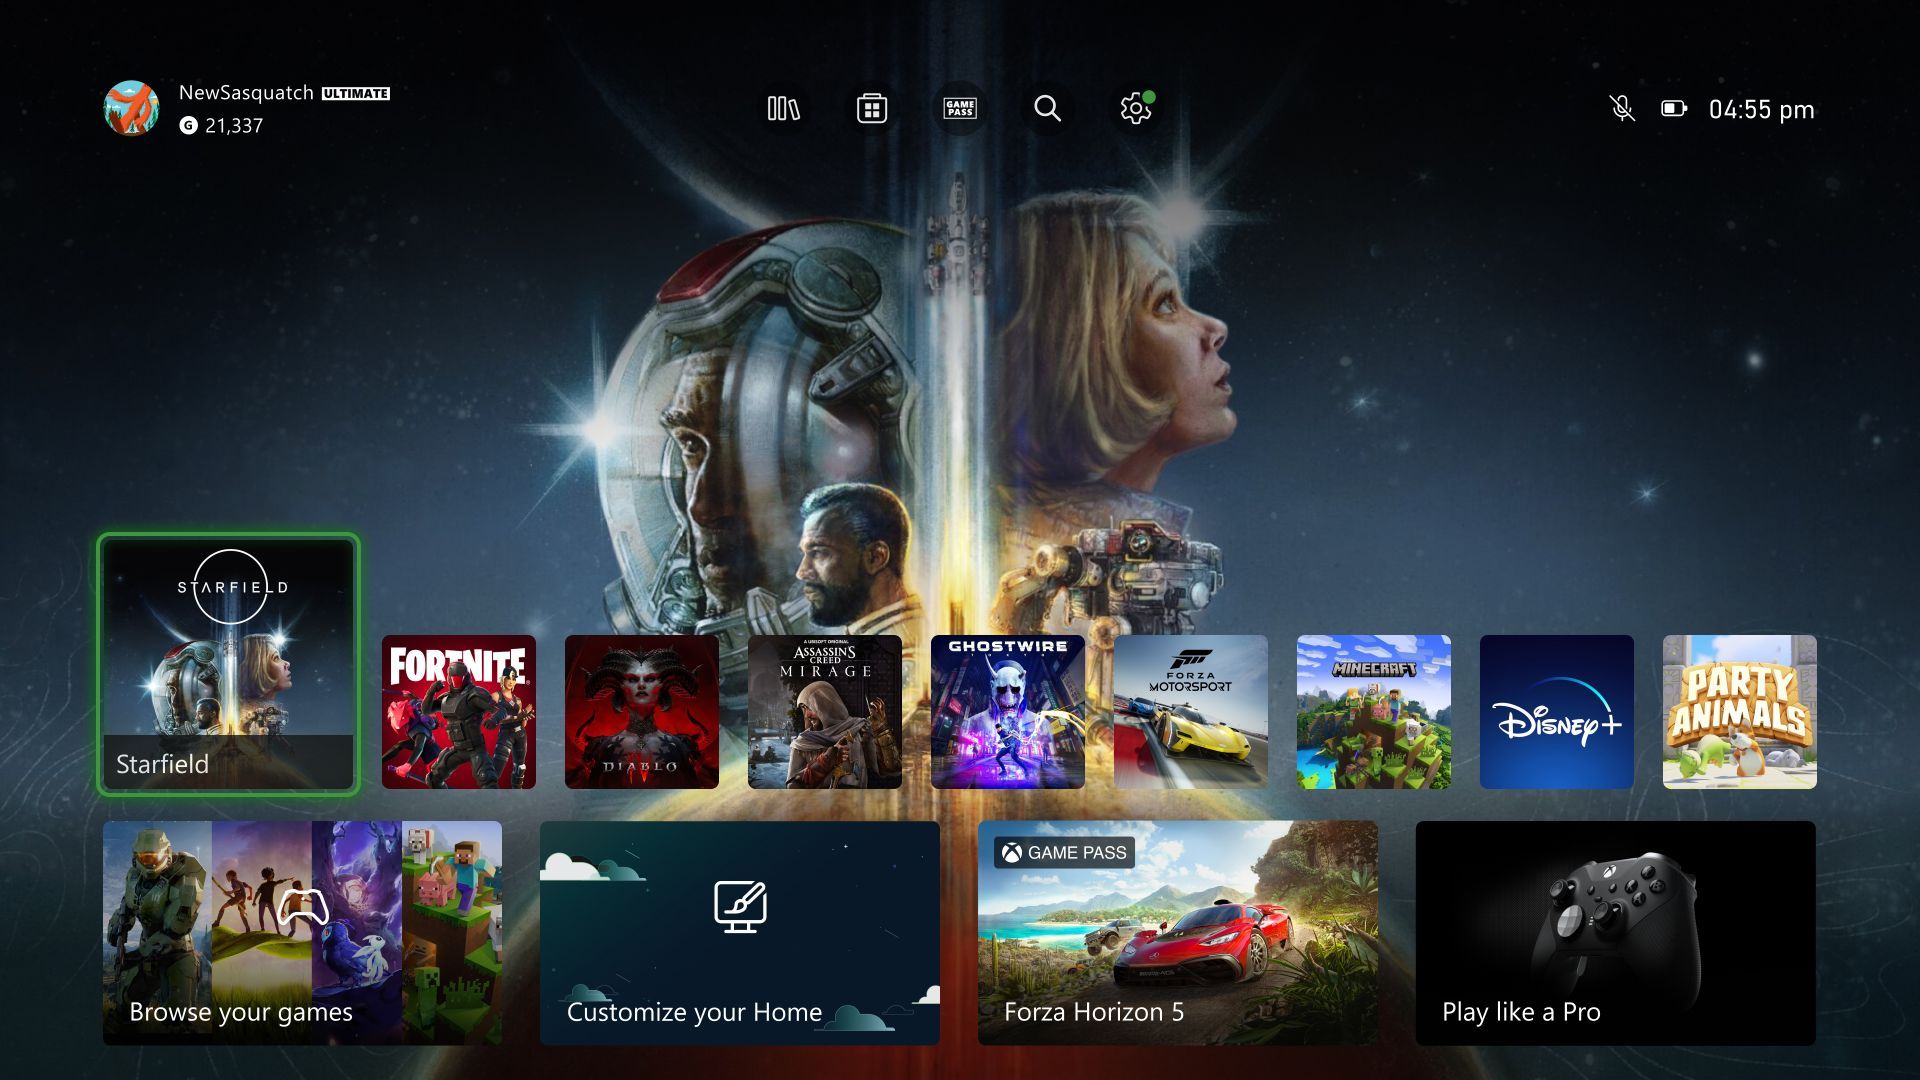 Xbox Series X/S and Xbox One Consoles Get New Home Screen UI in Latest Update